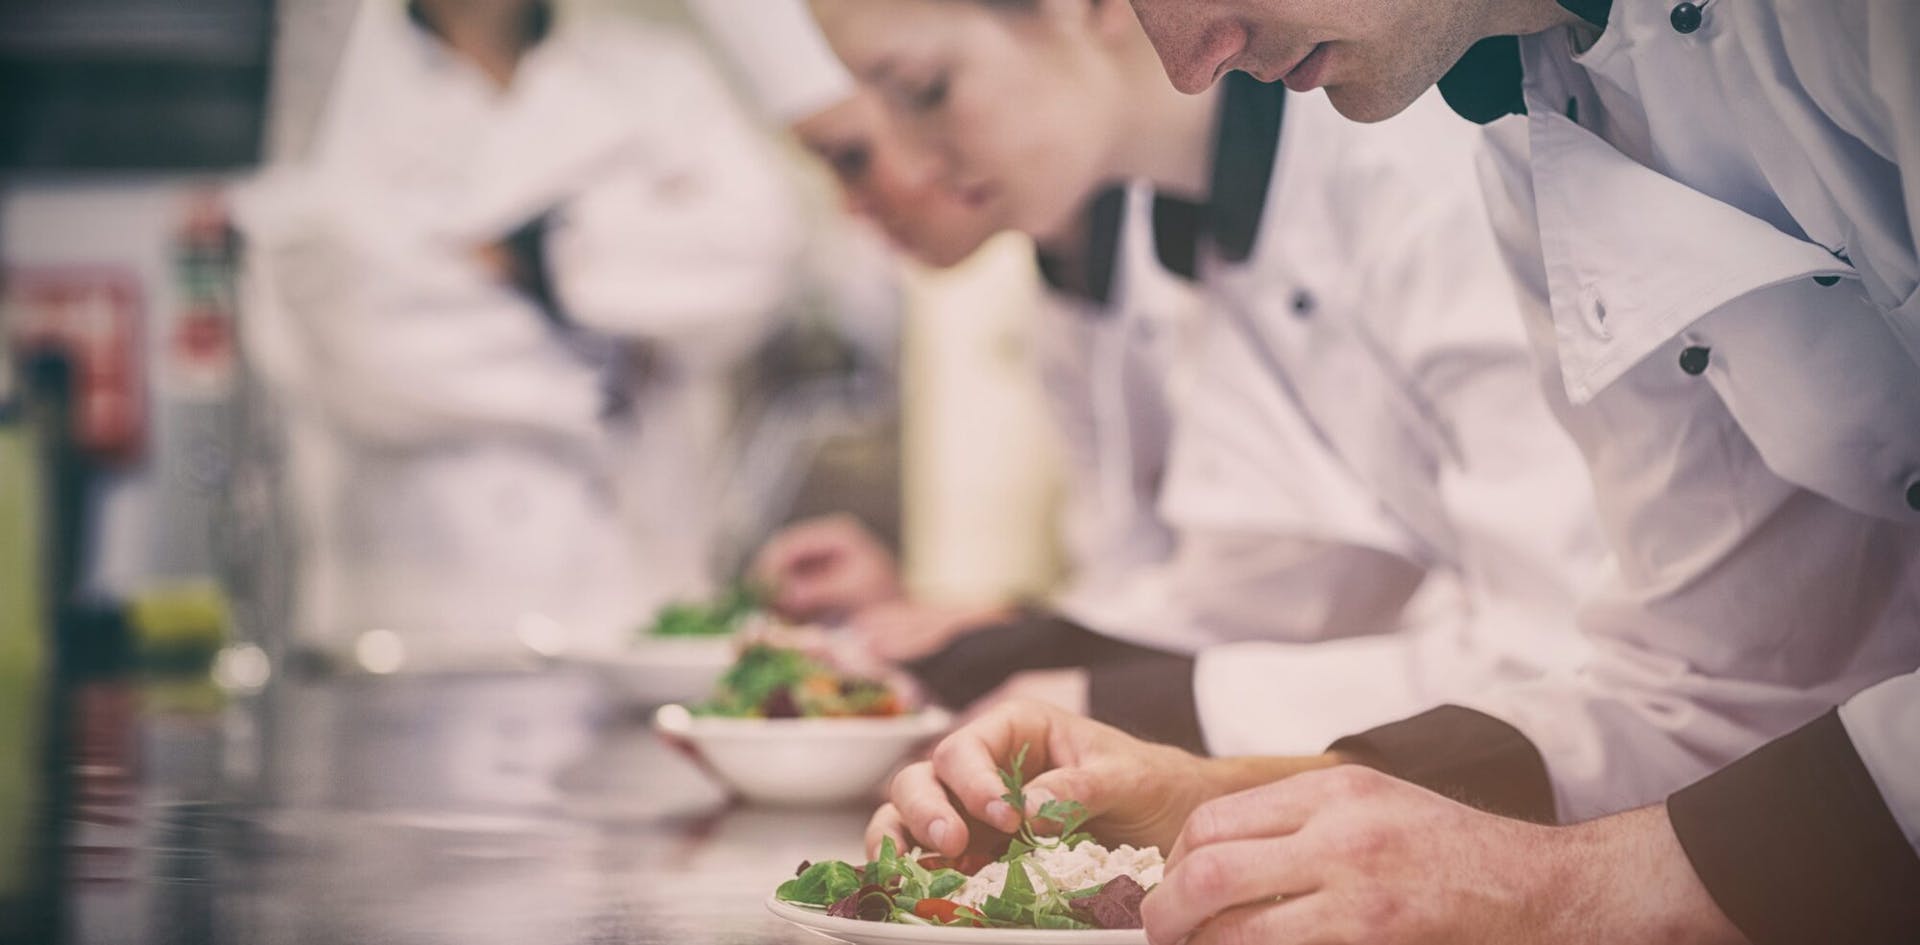 From QA to Culinary School: My Journey to SevenRooms